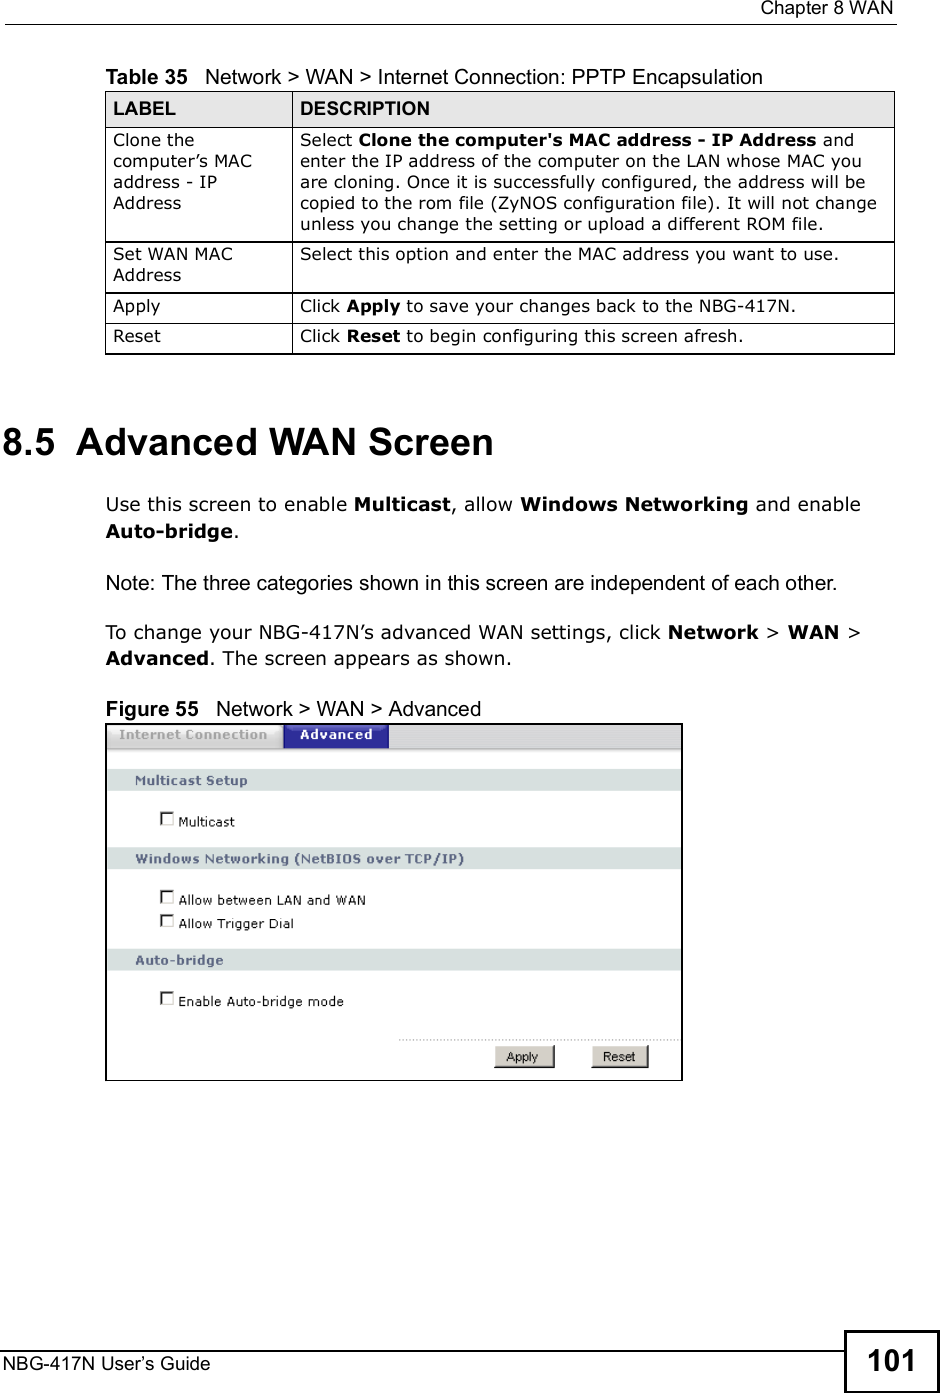  Chapter 8WANNBG-417N User s Guide 1018.5  Advanced WAN ScreenUse this screen to enable Multicast, allow Windows Networking and enable Auto-bridge.Note: The three categories shown in this screen are independent of each other.  To change your NBG-417N!s advanced WAN settings, click Network &gt; WAN &gt; Advanced. The screen appears as shown.Figure 55   Network &gt; WAN &gt; Advanced Clone the computer!s MAC address - IP AddressSelect Clone the computer&apos;s MAC address - IP Address and enter the IP address of the computer on the LAN whose MAC you are cloning. Once it is successfully configured, the address will be copied to the rom file (ZyNOS configuration file). It will not change unless you change the setting or upload a different ROM file. Set WAN MAC AddressSelect this option and enter the MAC address you want to use.Apply Click Apply to save your changes back to the NBG-417N.Reset Click Reset to begin configuring this screen afresh.Table 35   Network &gt; WAN &gt; Internet Connection: PPTP EncapsulationLABEL DESCRIPTION